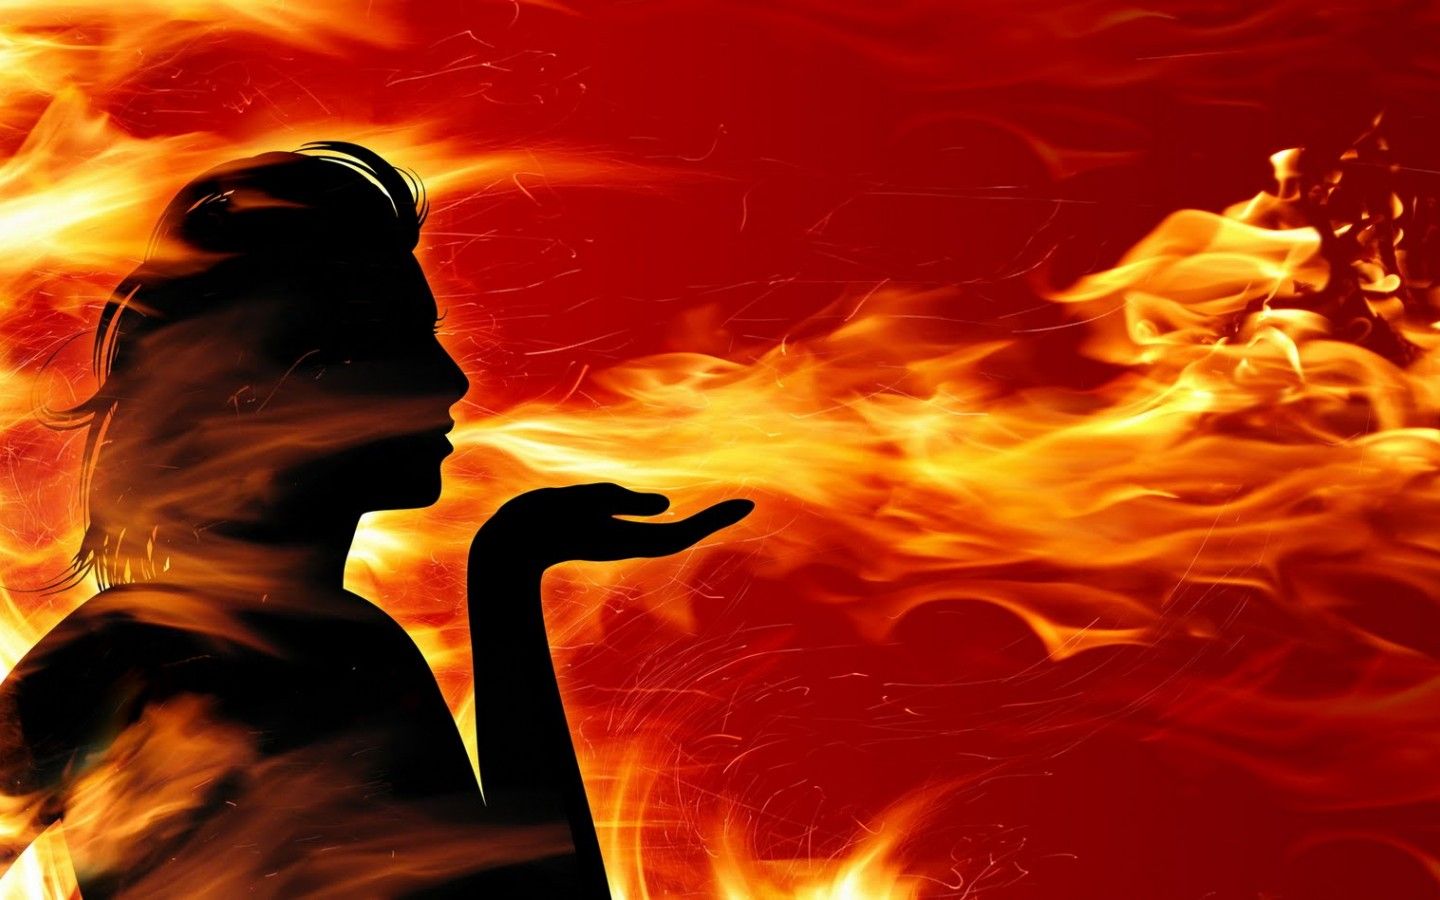 Flame wallpapers and images - wallpapers, pictures, photos